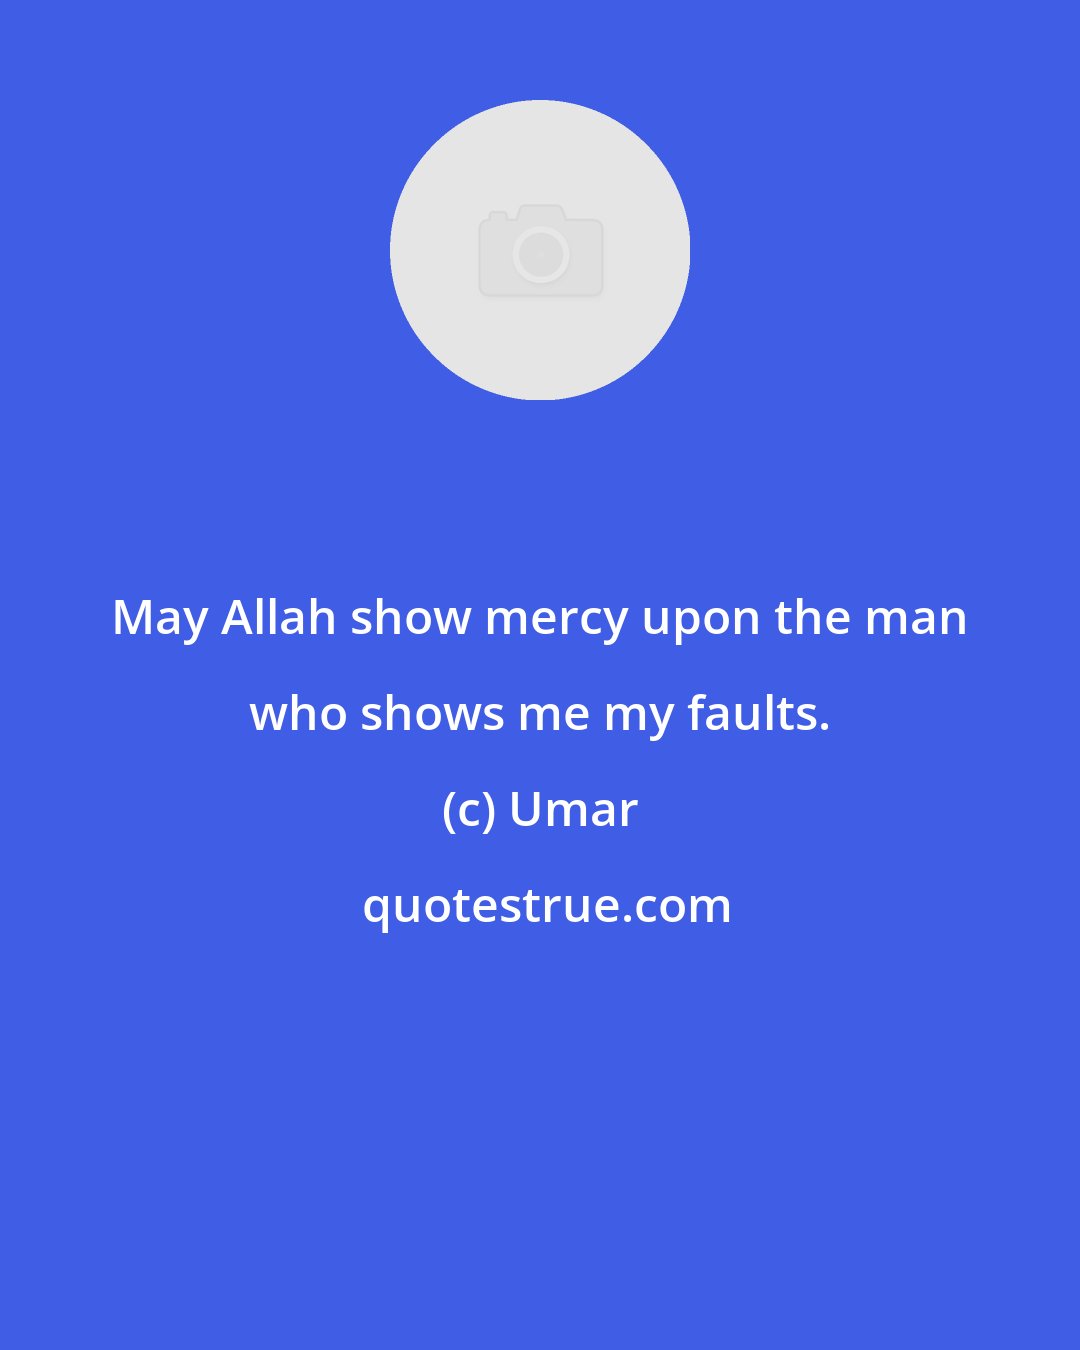 Umar: May Allah show mercy upon the man who shows me my faults.